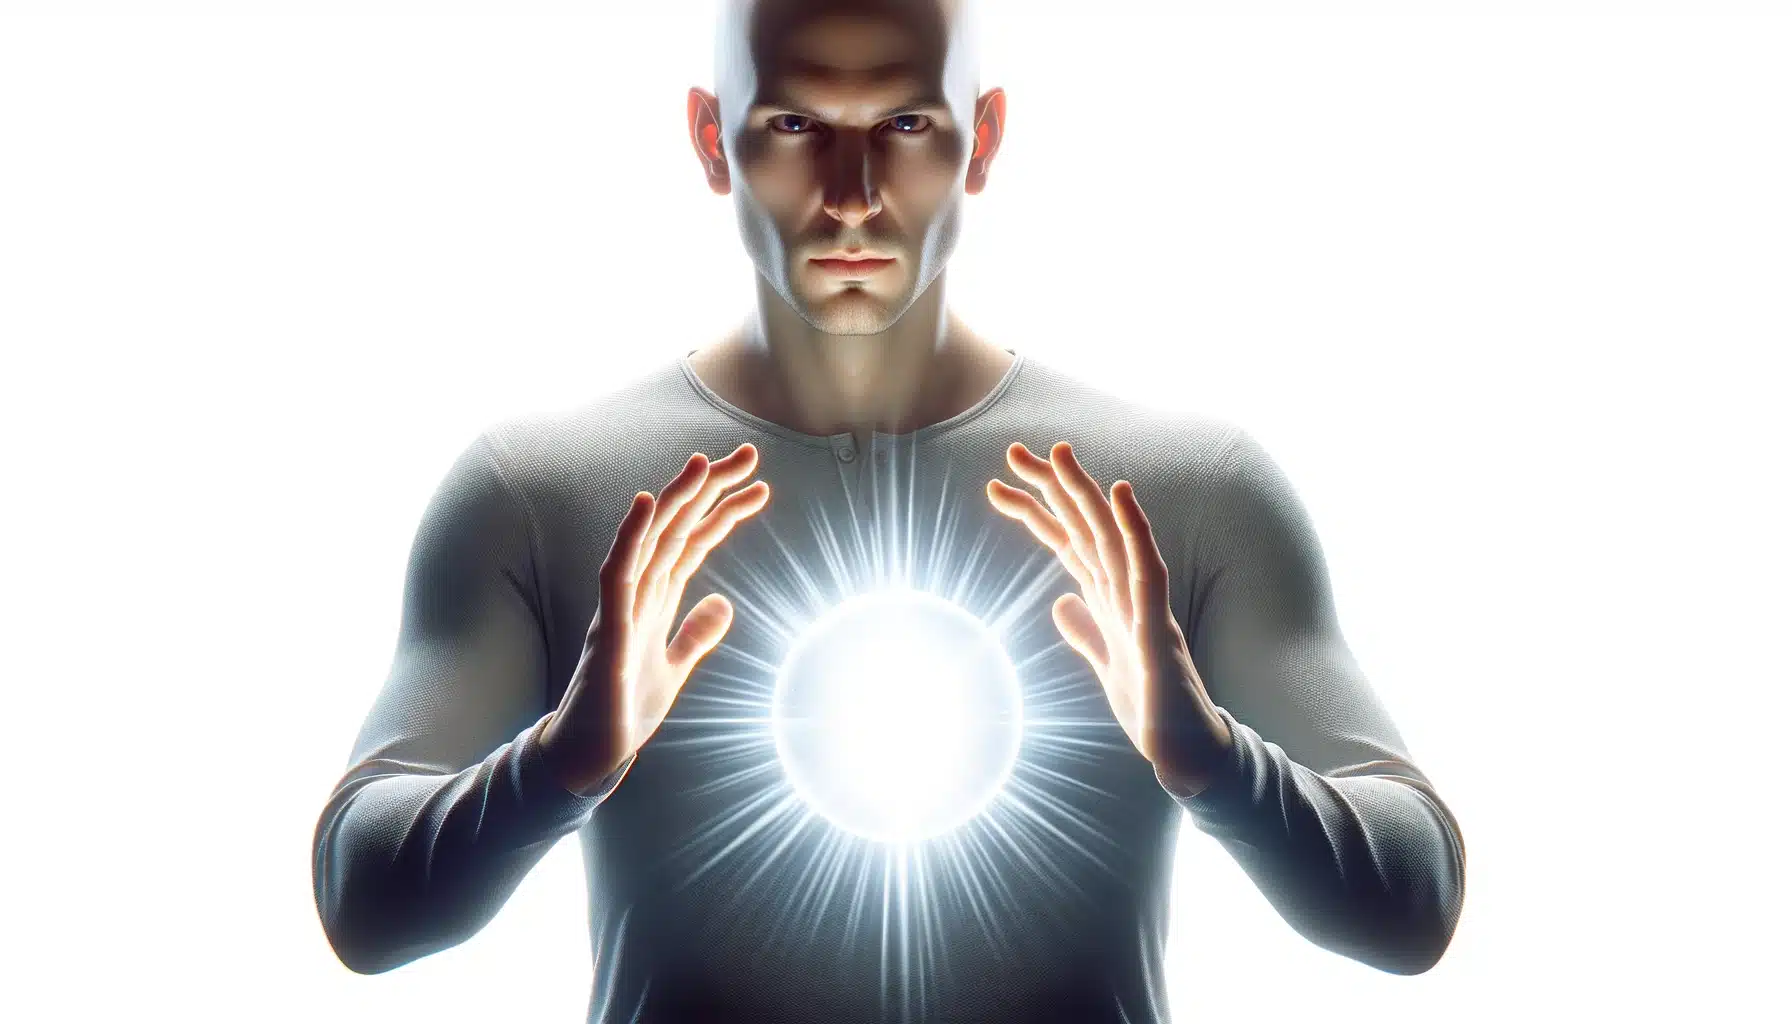 A focused man with a bald head creating a psi ball of energy between his hands, standing against a pure white background.